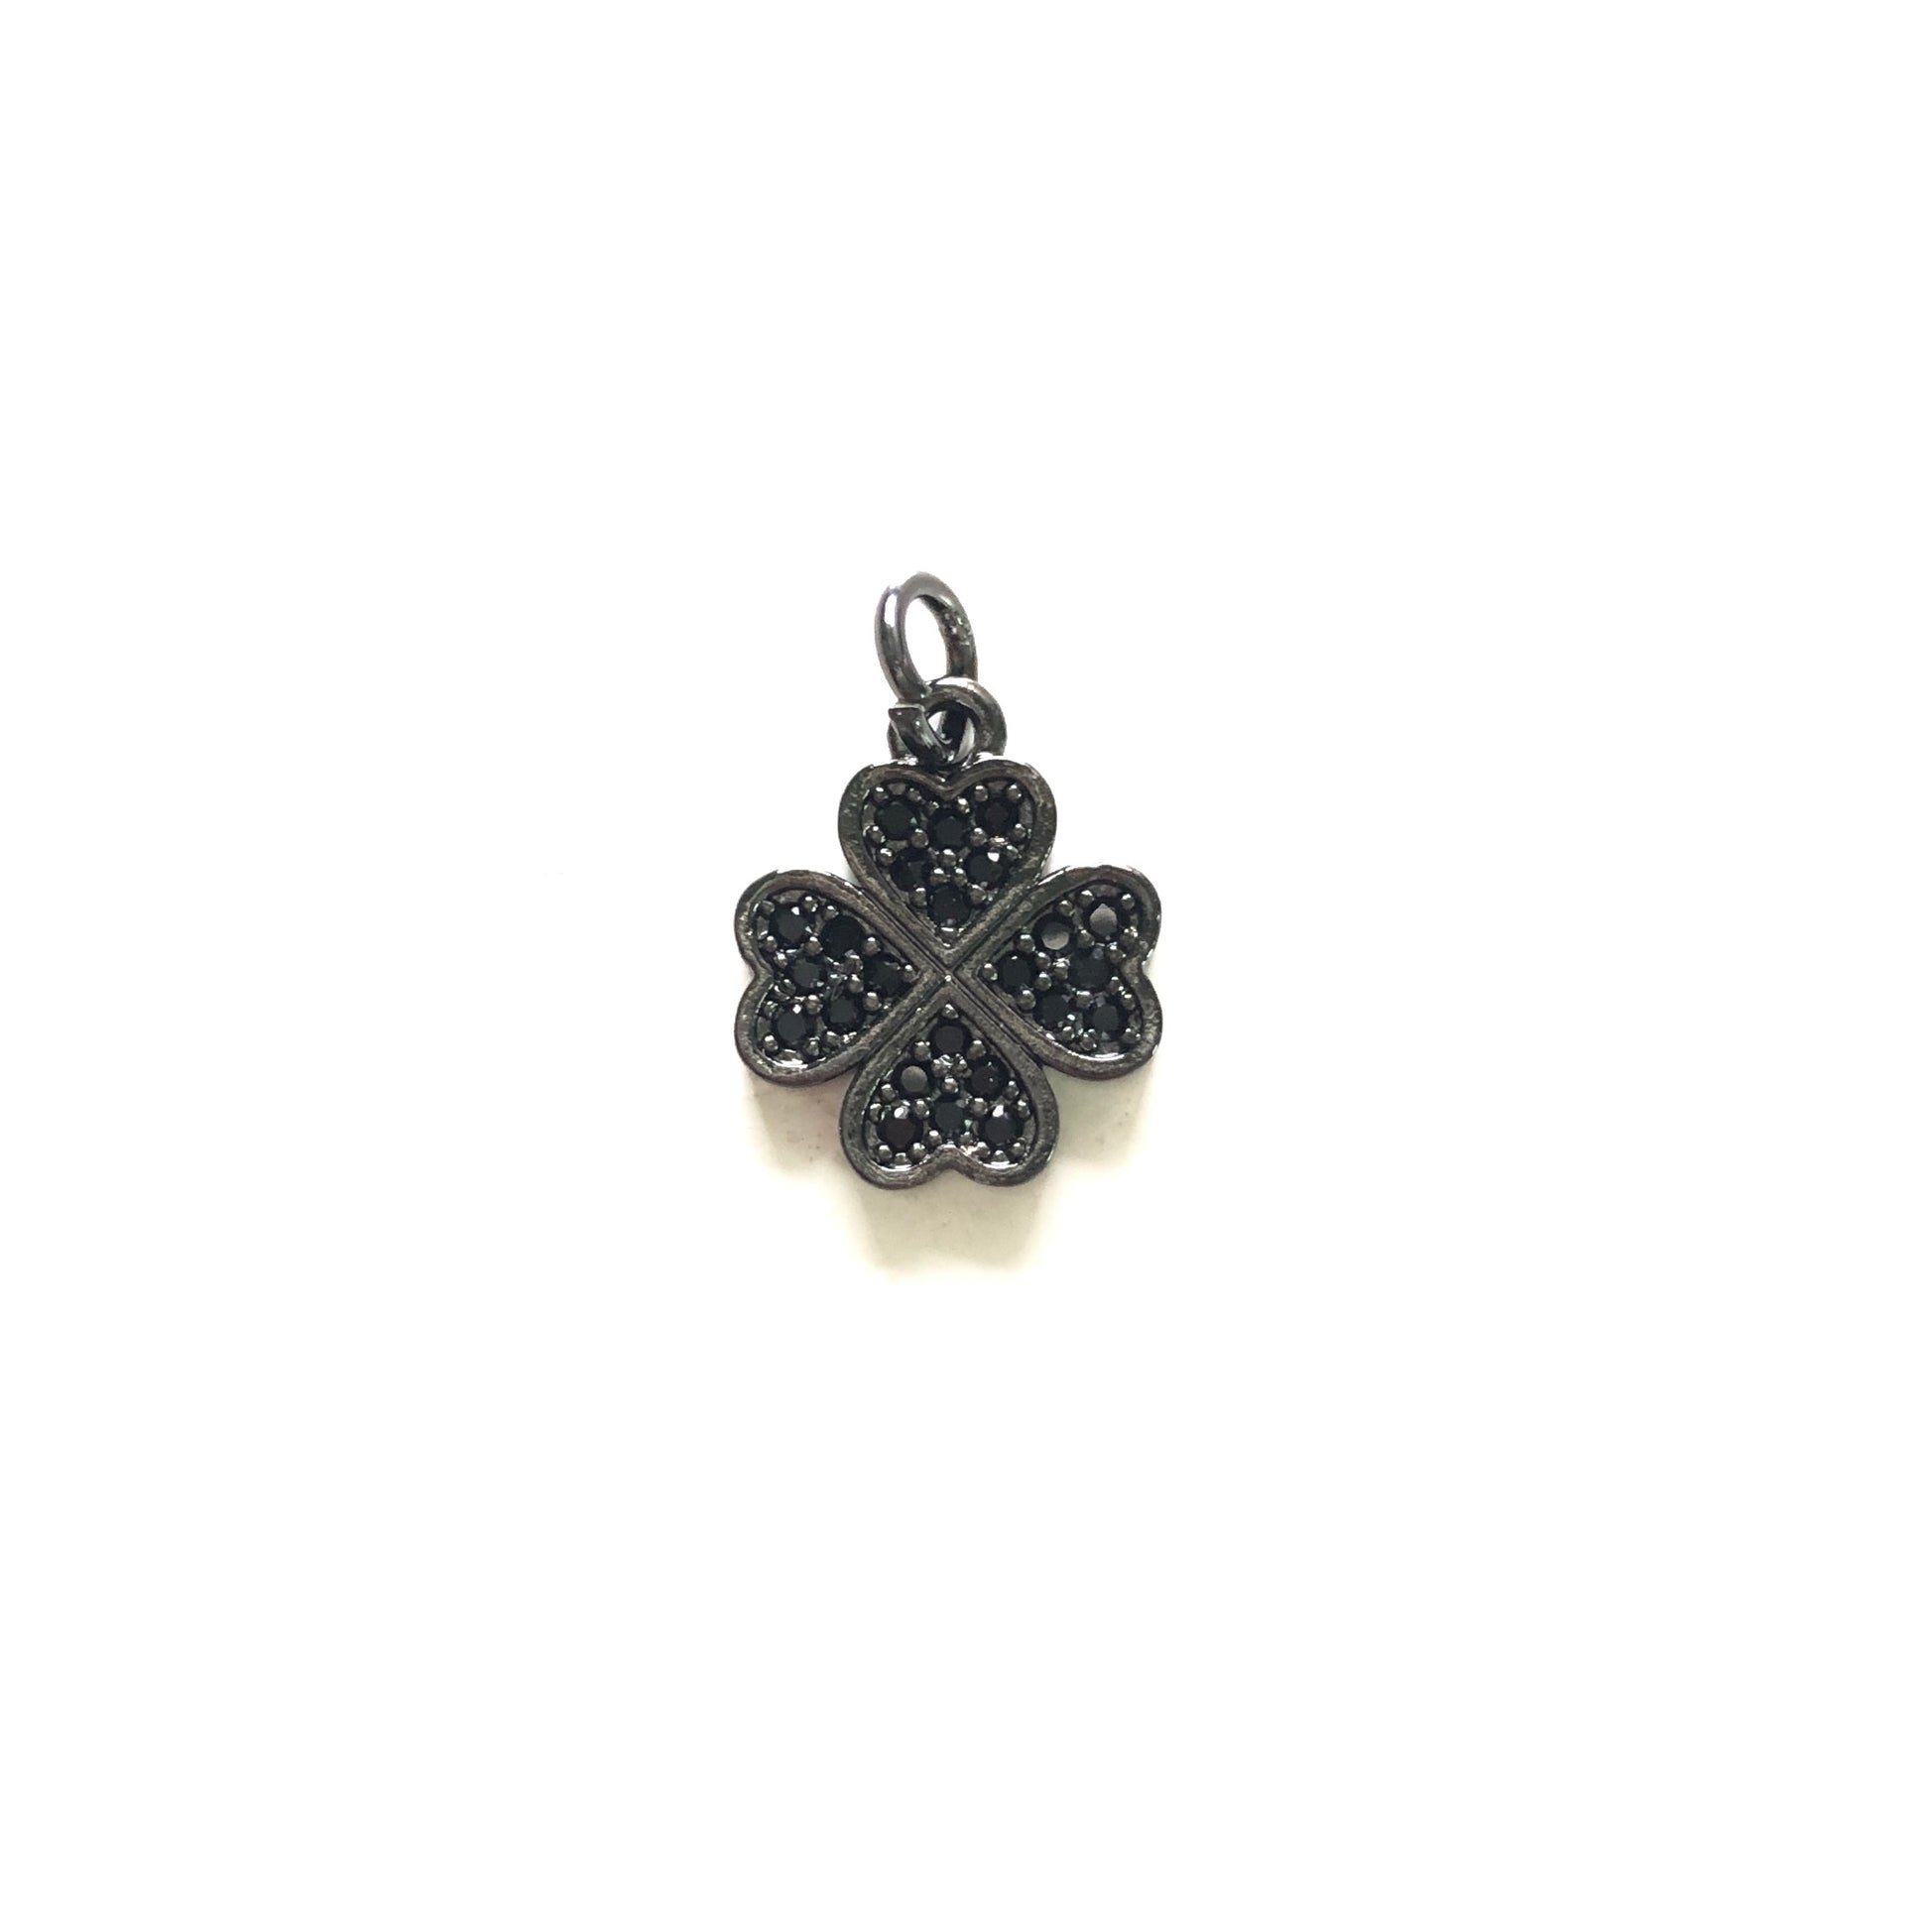 10pcs/lot 14*12mm Small Size CZ Pave Four Leaf Clover Charms Black CZ Paved Charms Flowers Small Sizes Charms Beads Beyond